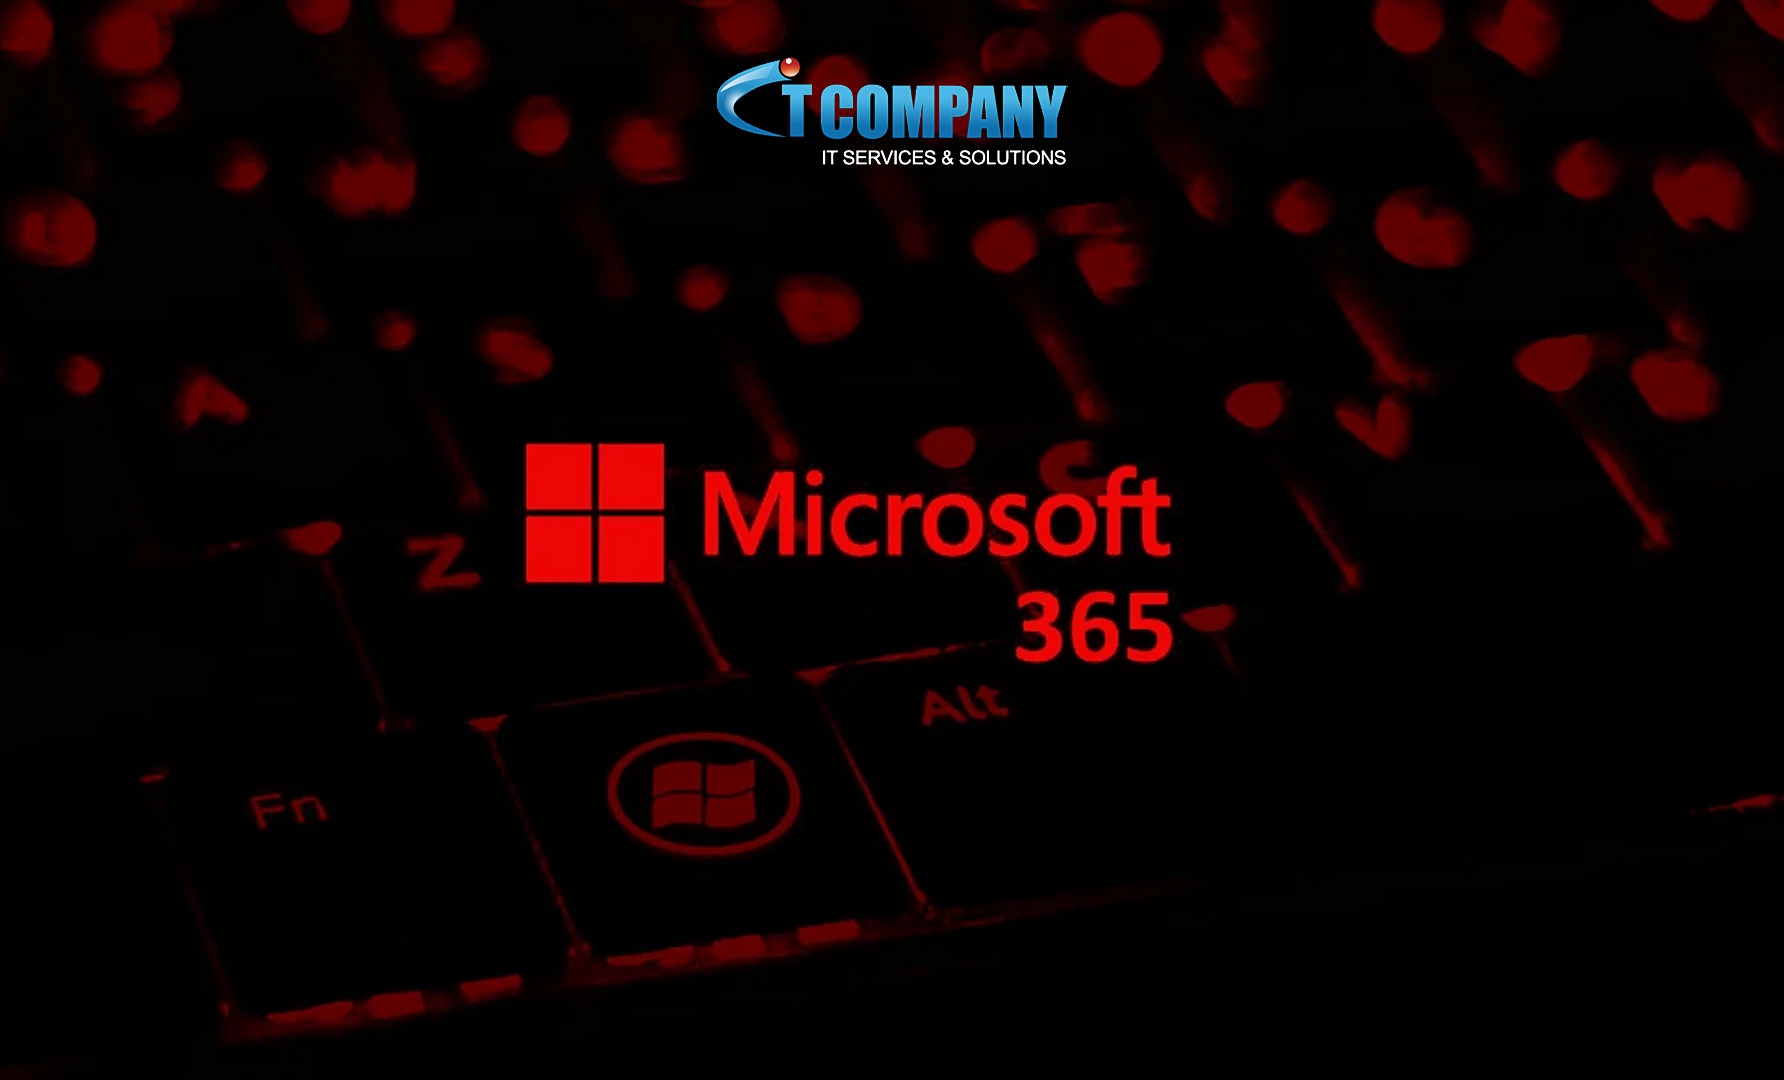 Microsoft 365 vulnerability allows the malware to infiltrate